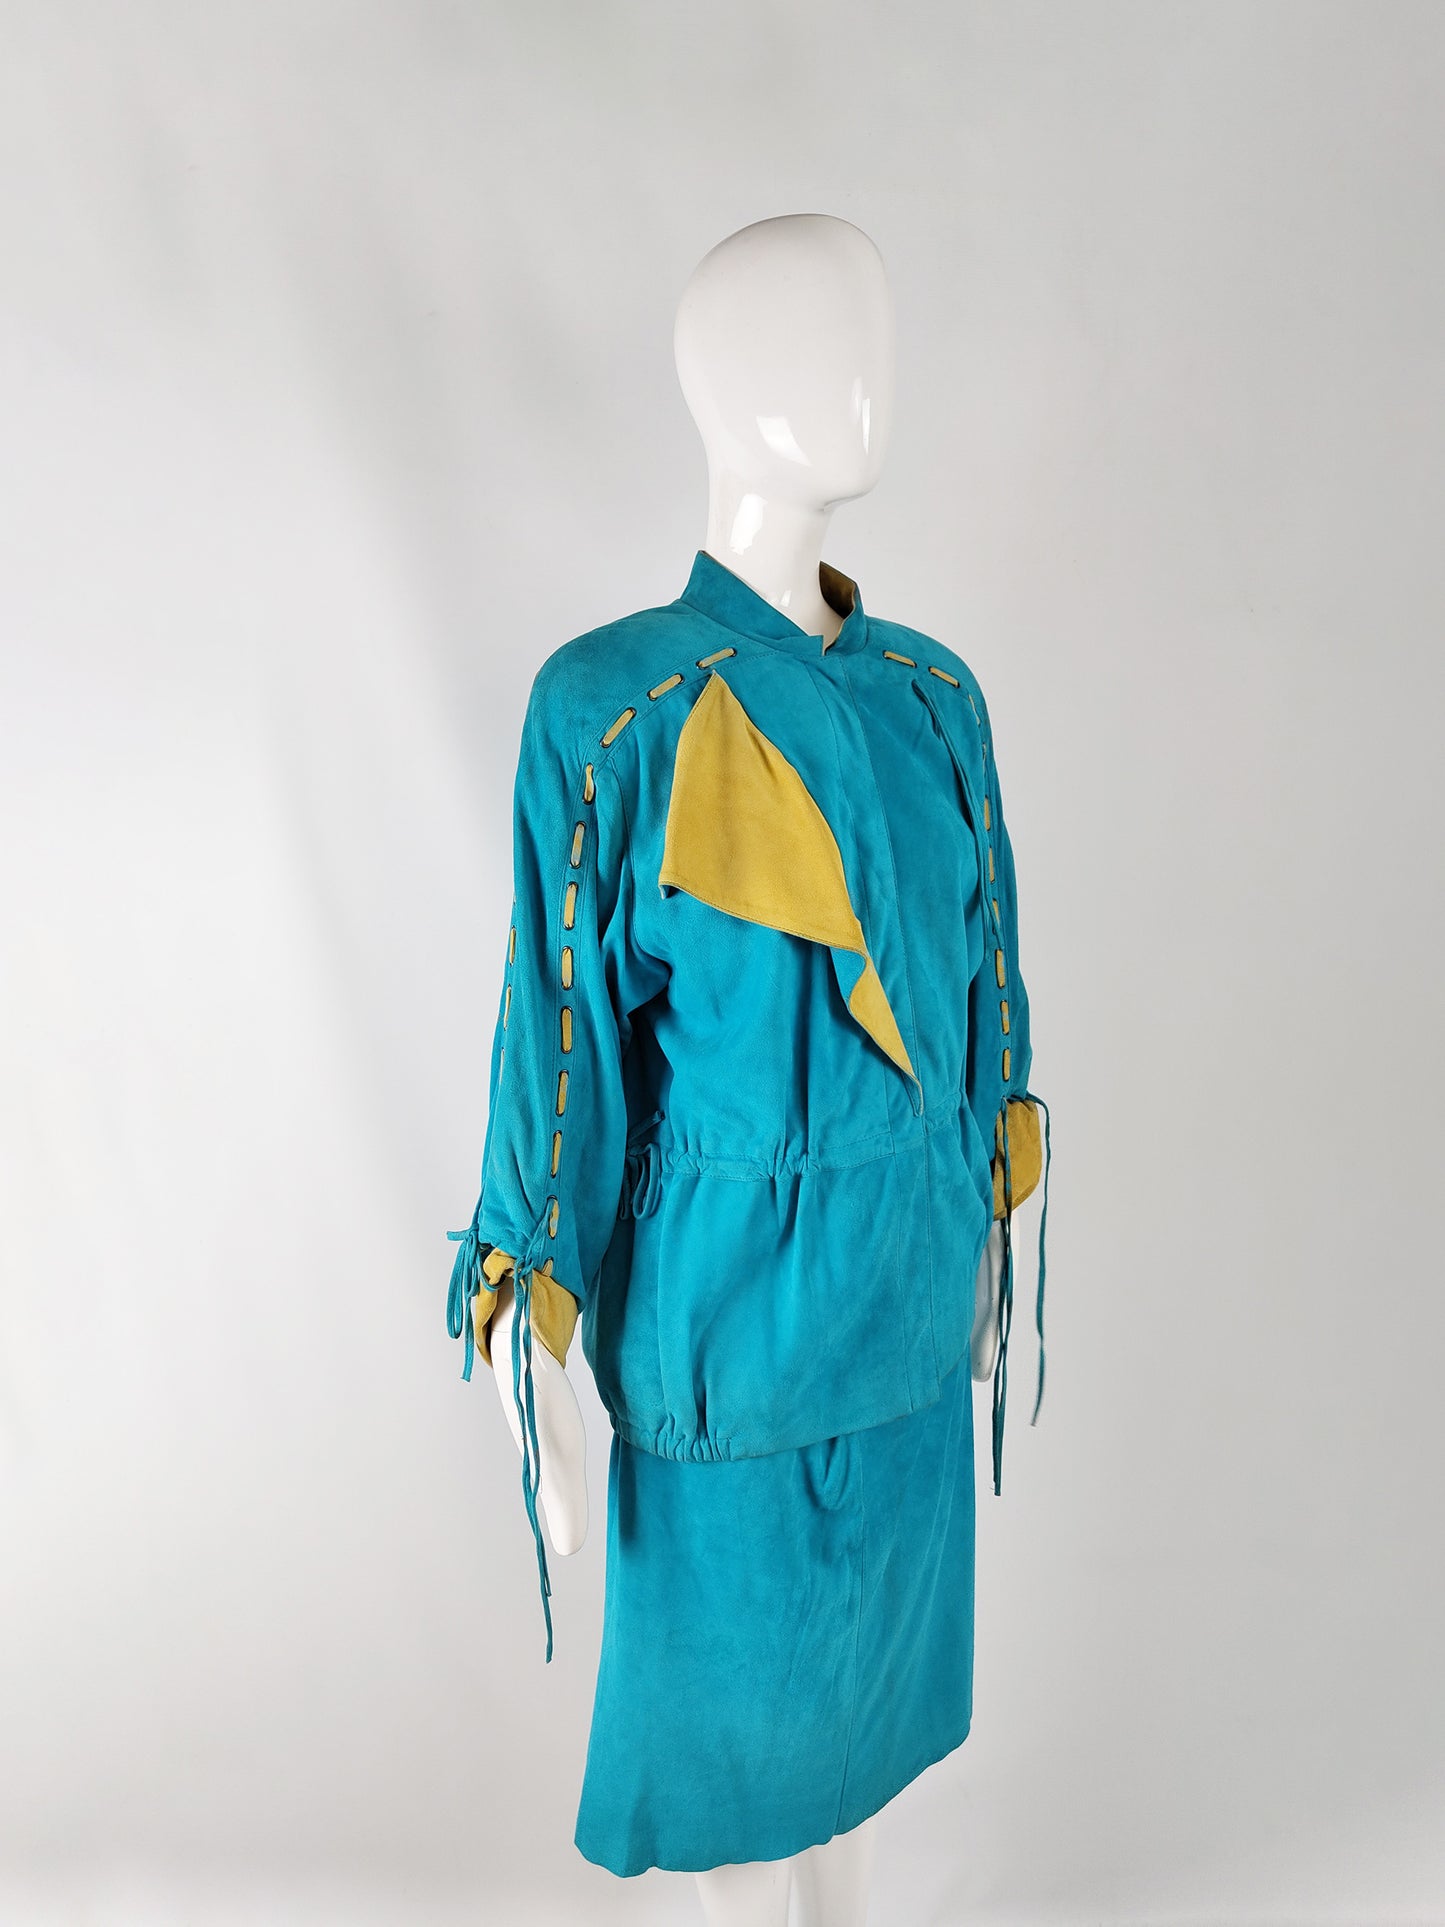 Enrico Coveri Vintage Turquoise Real Suede Skirt Suit, 1980s